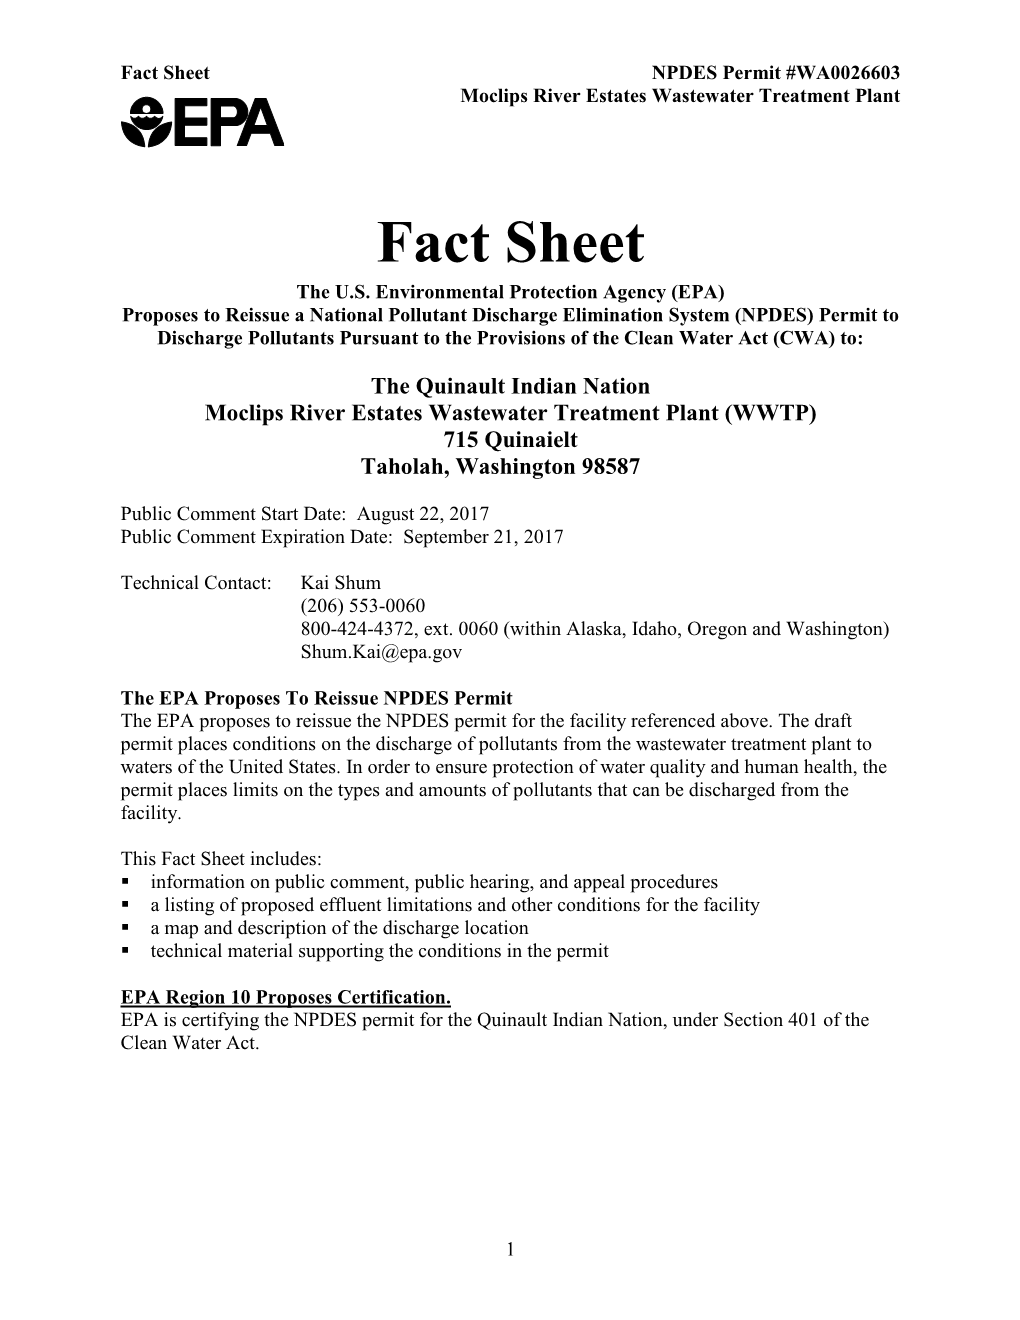 Fact Sheet for the Draft NPDES Permit for Moclips River Estates